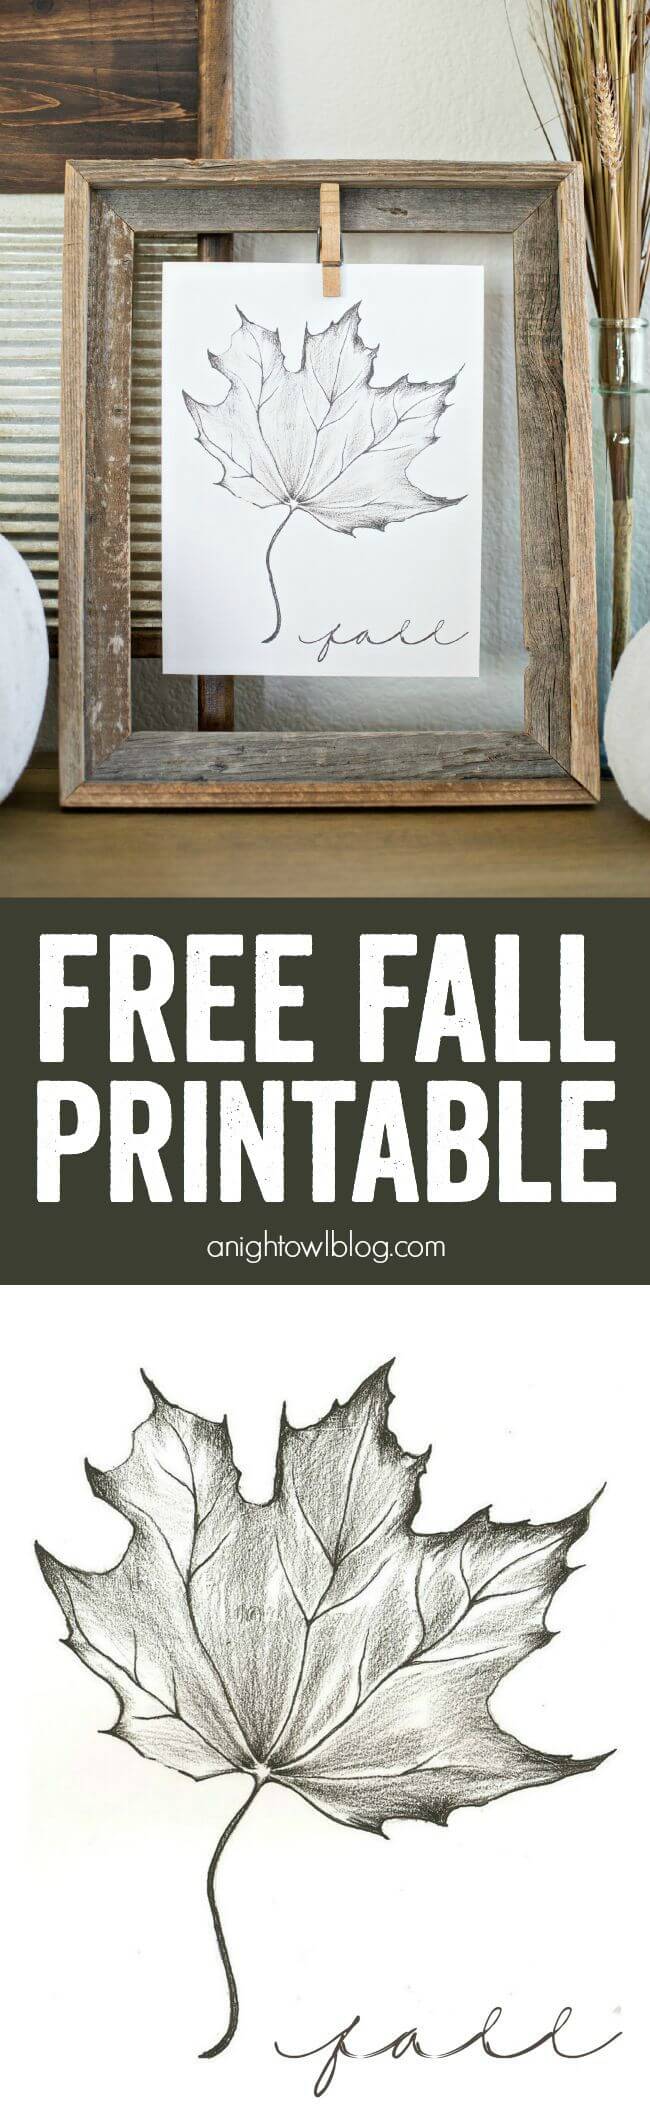 Fall printable | DIY Fall-Inspired Home Decorations With Leaves - FarmFoodFamily